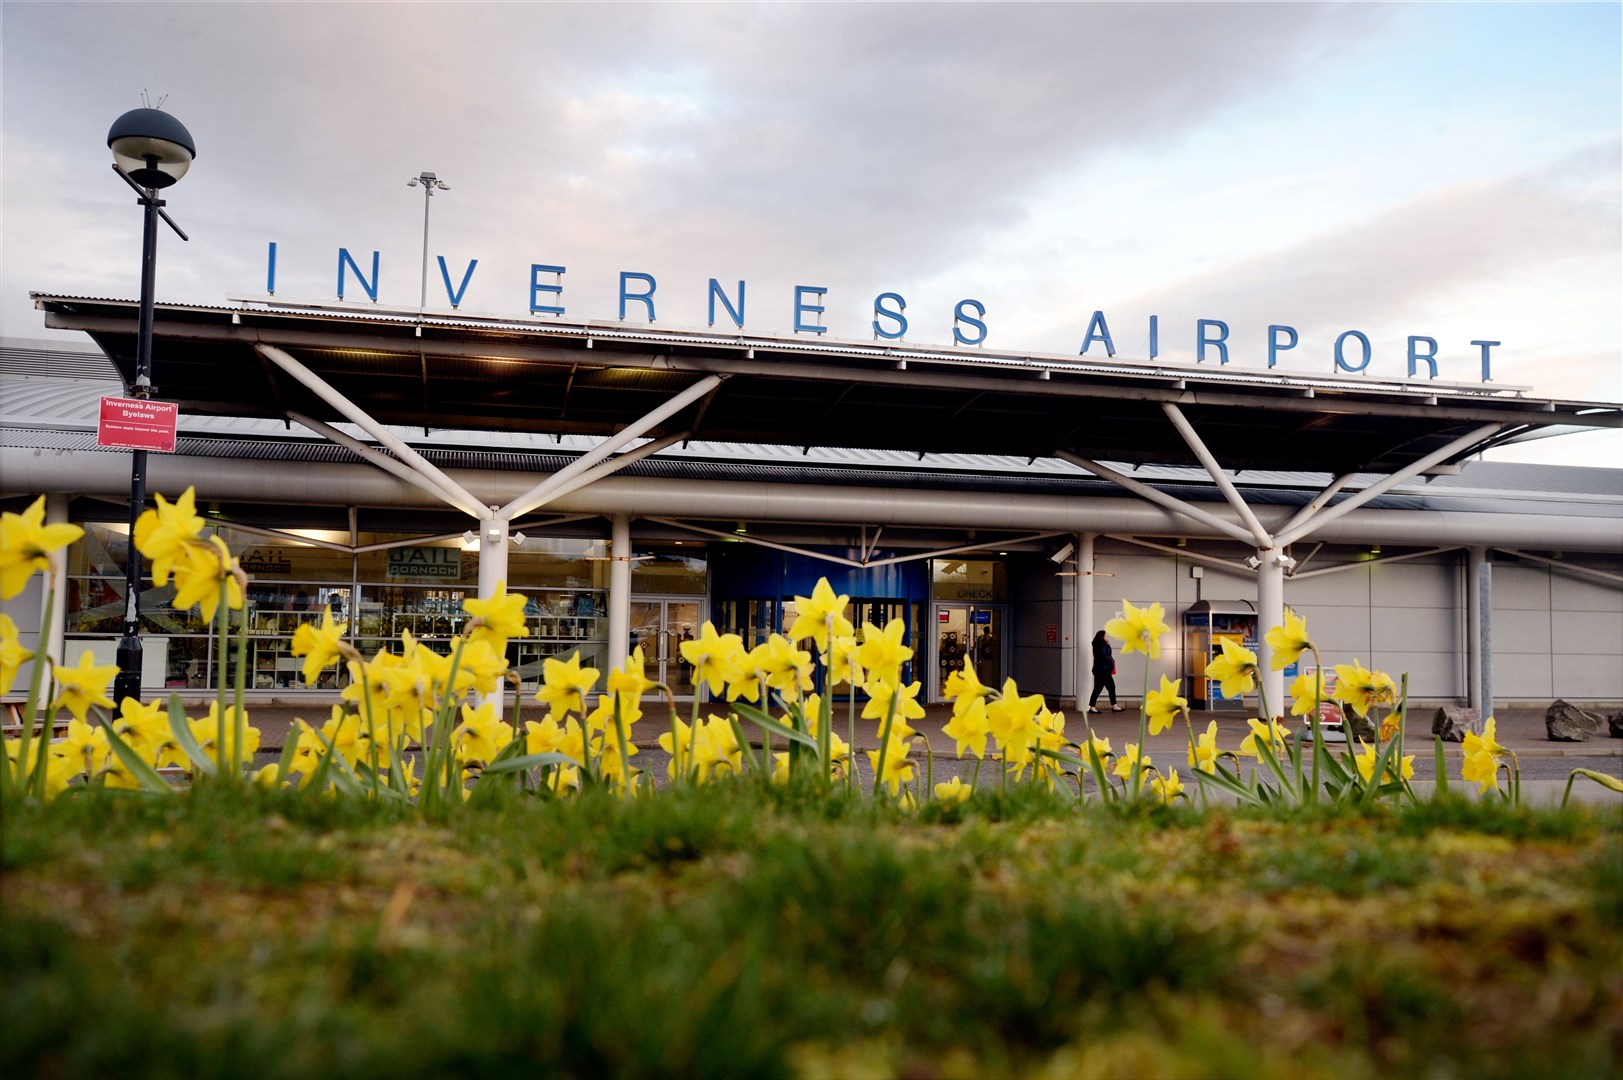 Inverness Airport will remain open for lifeline and essential services.